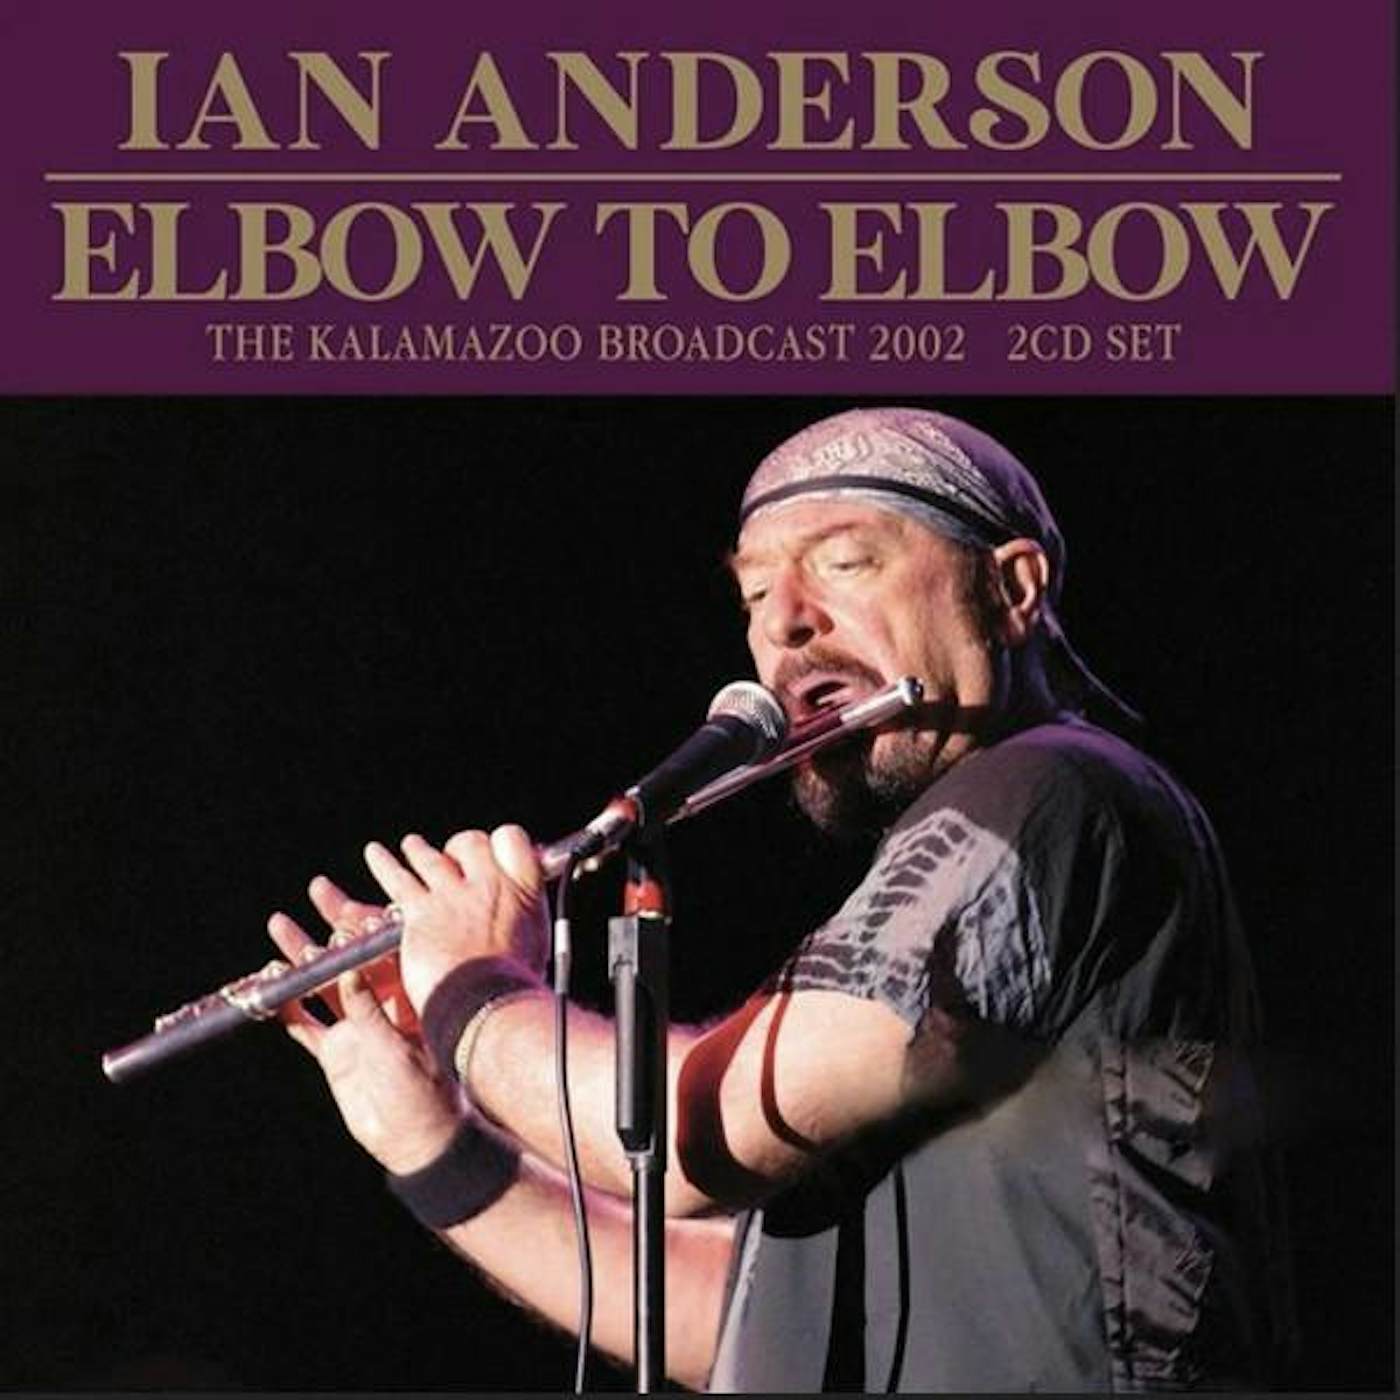 Ian Anderson ELBOW TO ELBOW (2CD) CD